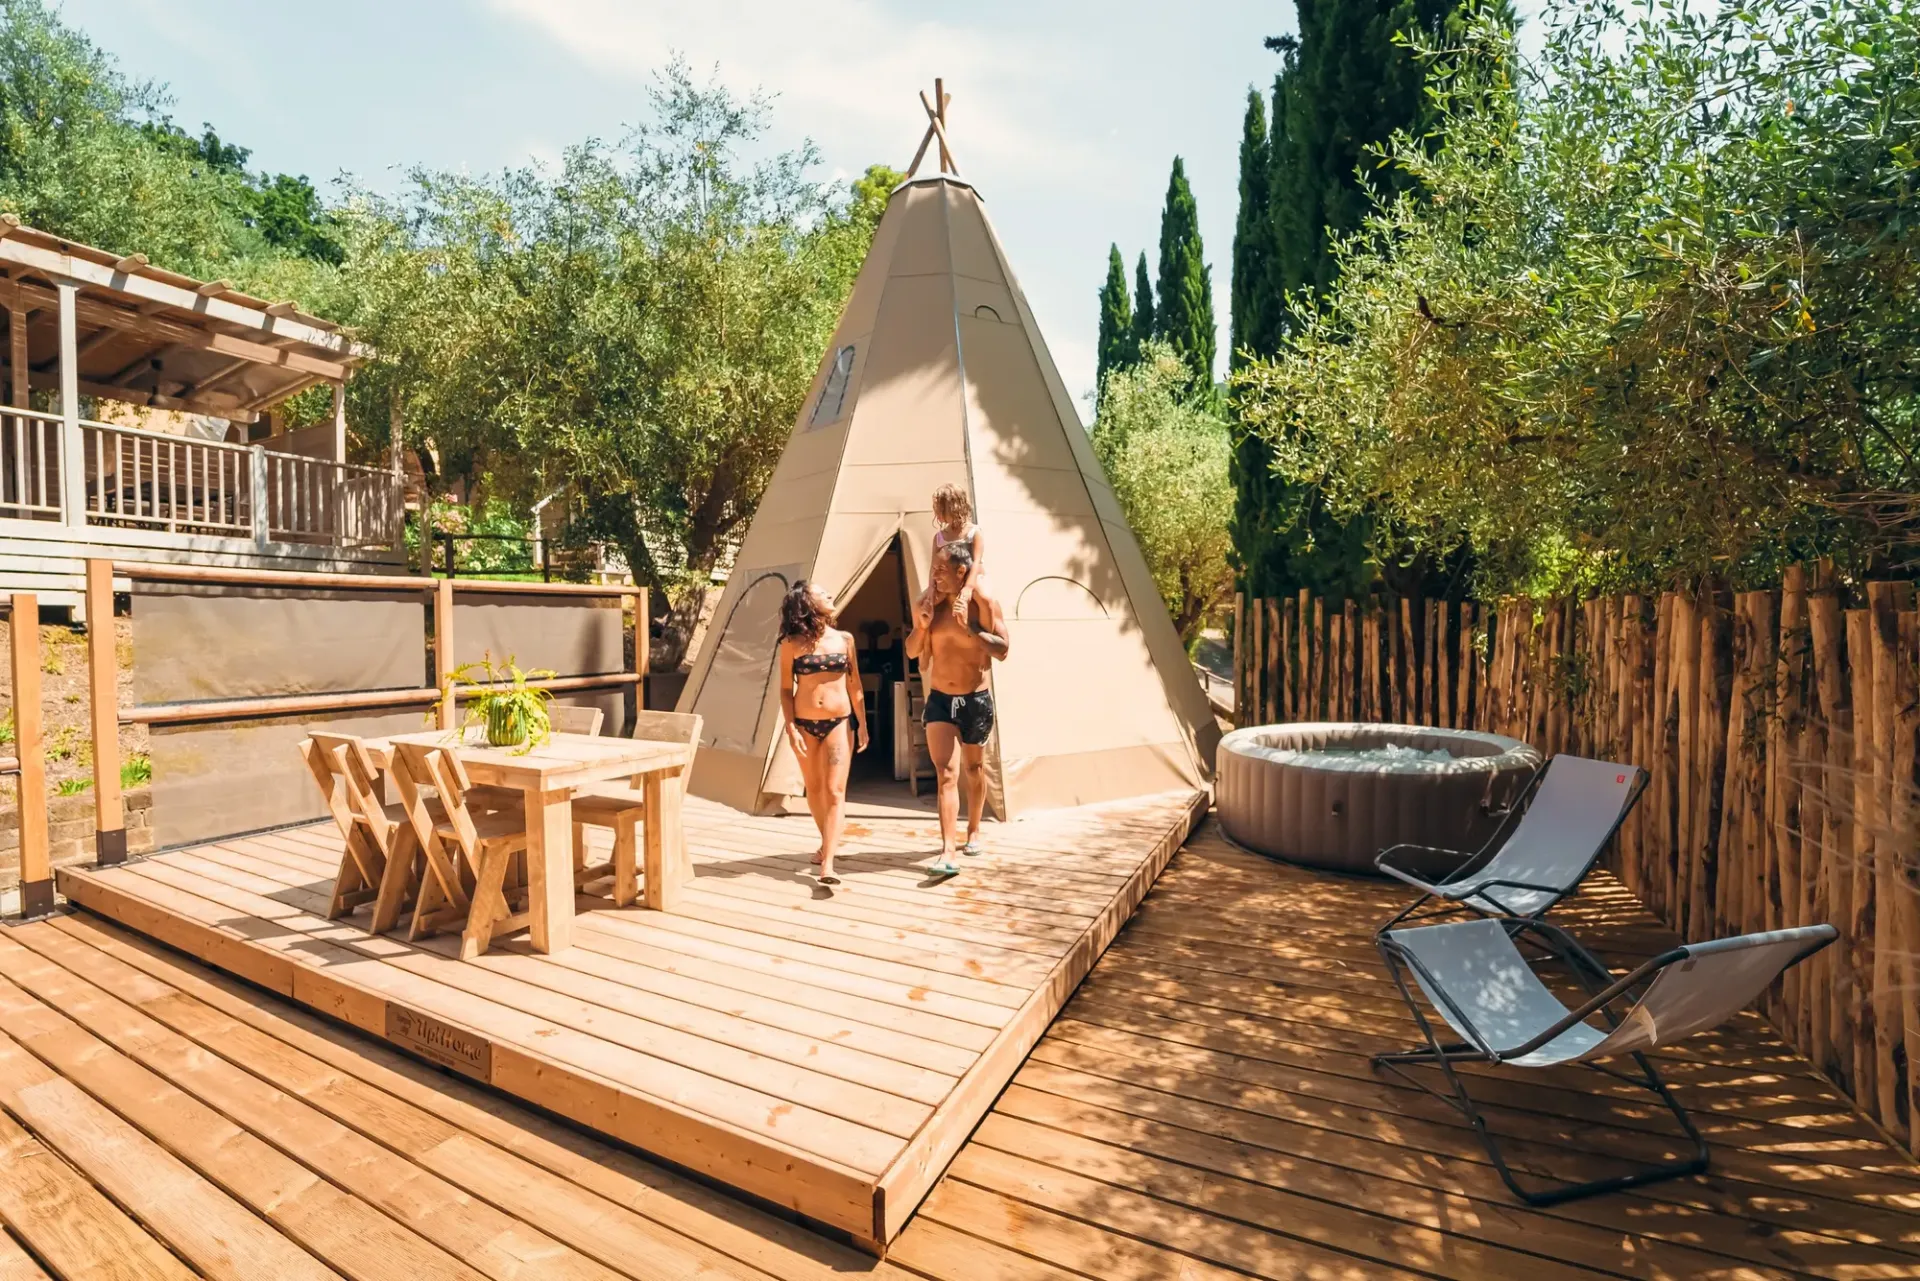 Exclusieve glamping accommodatie